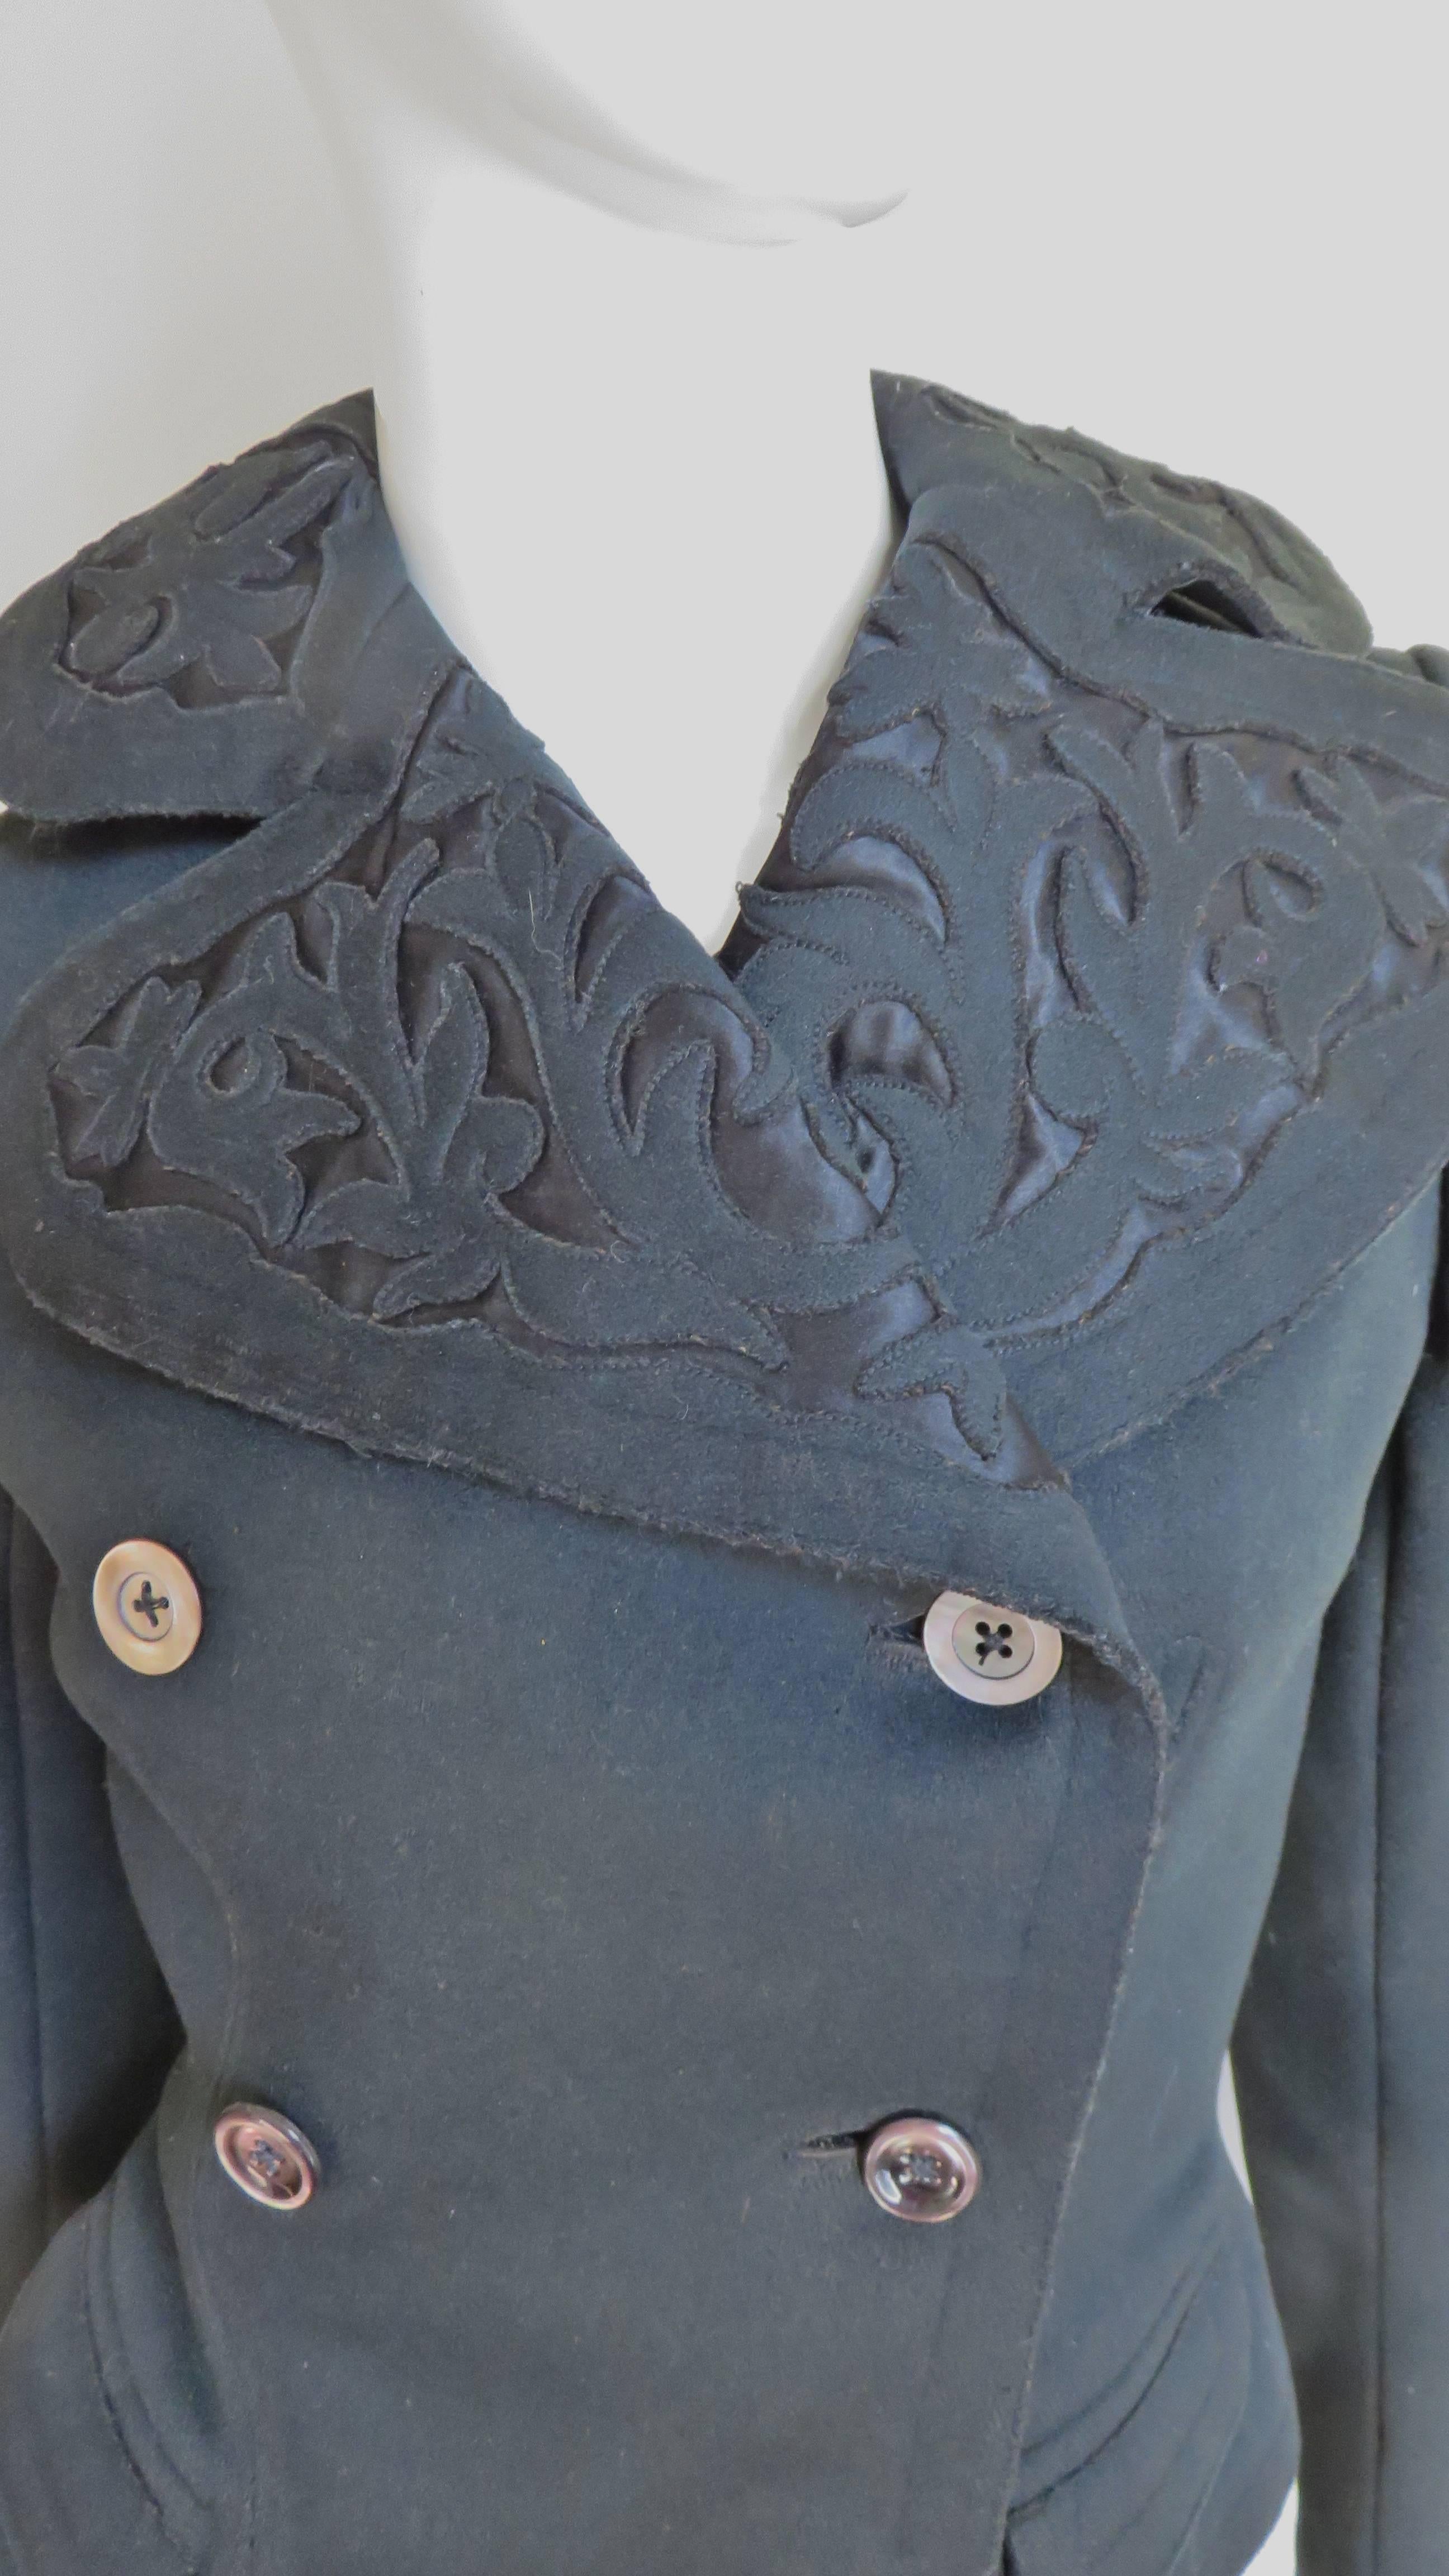 An incredible rich black wool double breasted jacket from the early 1900's.  It has long sleeves, small waist welt flap pockets and a rounded lapel collar with intricately cut elaborately appliqued wool. The detail is amazing.  It is double breasted